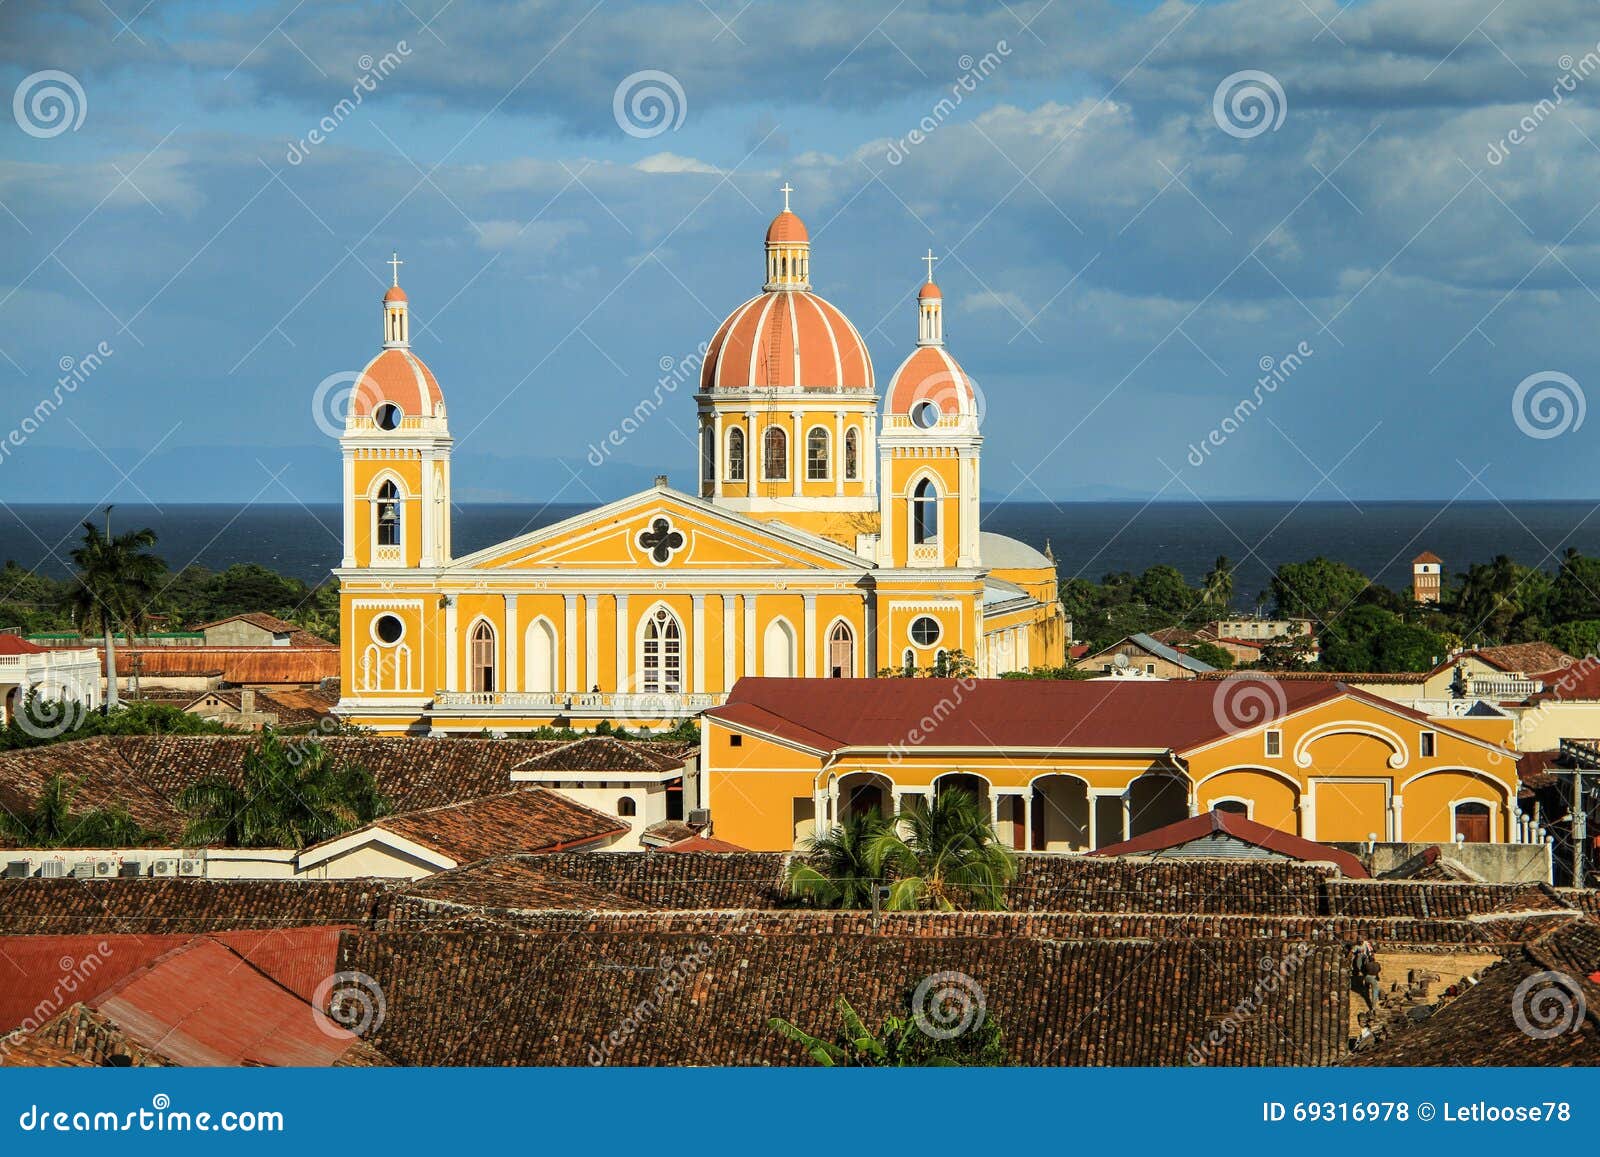 our lady of the assumption cathedral, granada, nicaragua